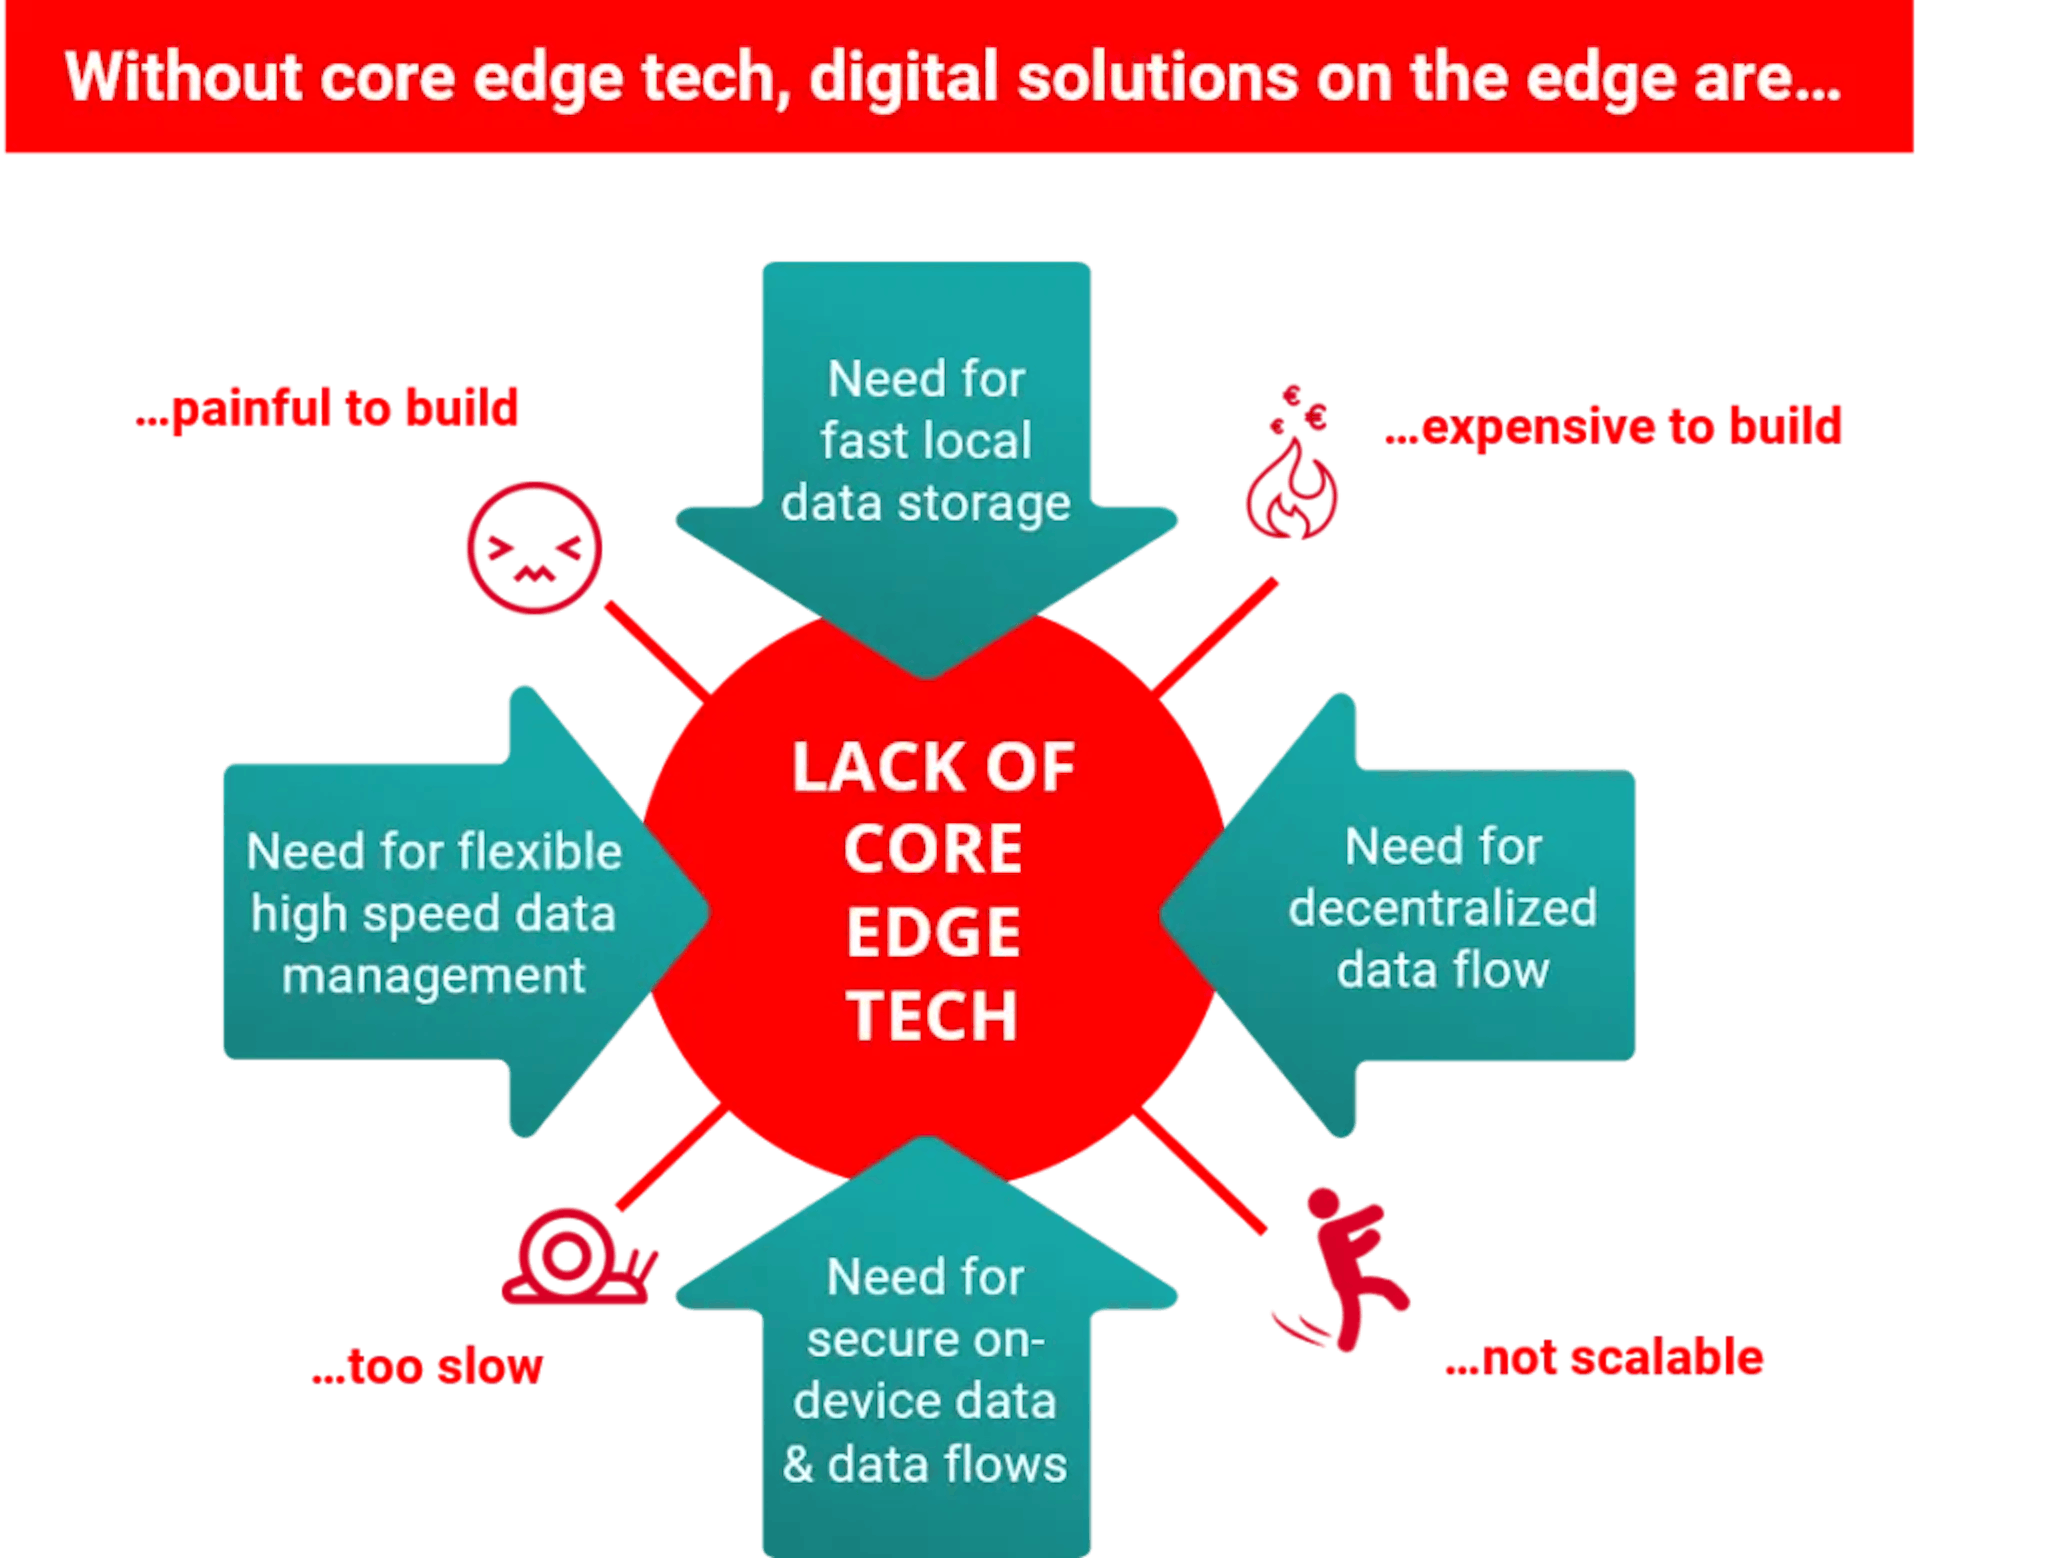 The challenge of Edge Computing: Lack of core software infastructure